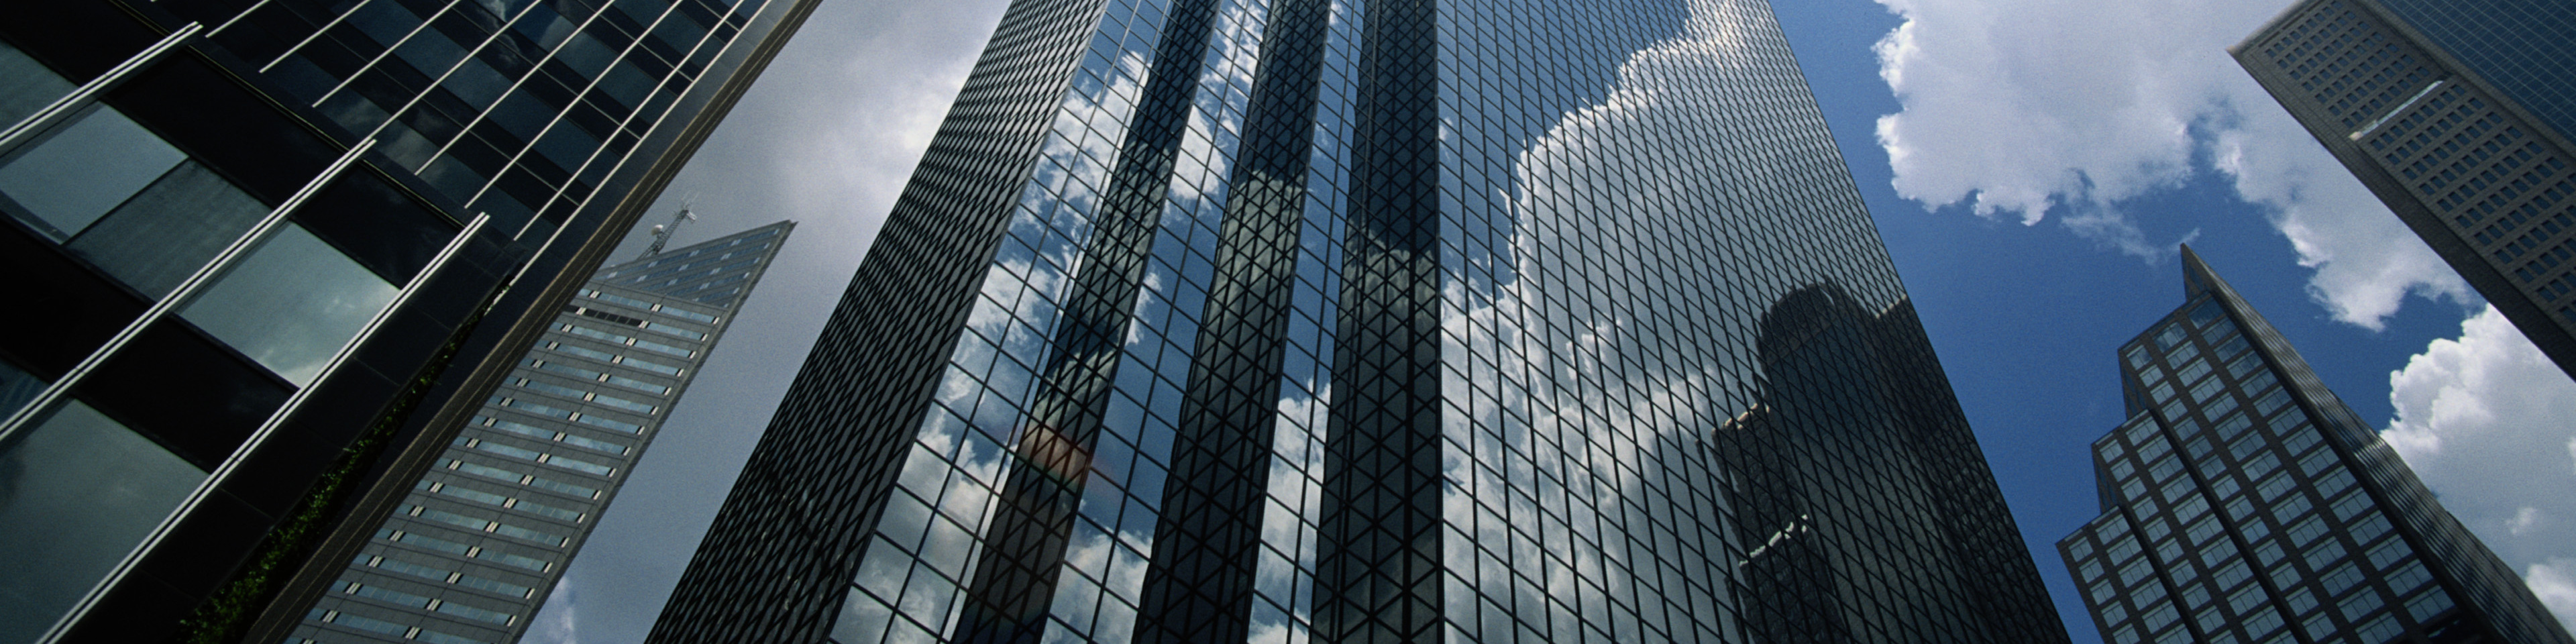 Office buildings reflecting clouds, low angle view